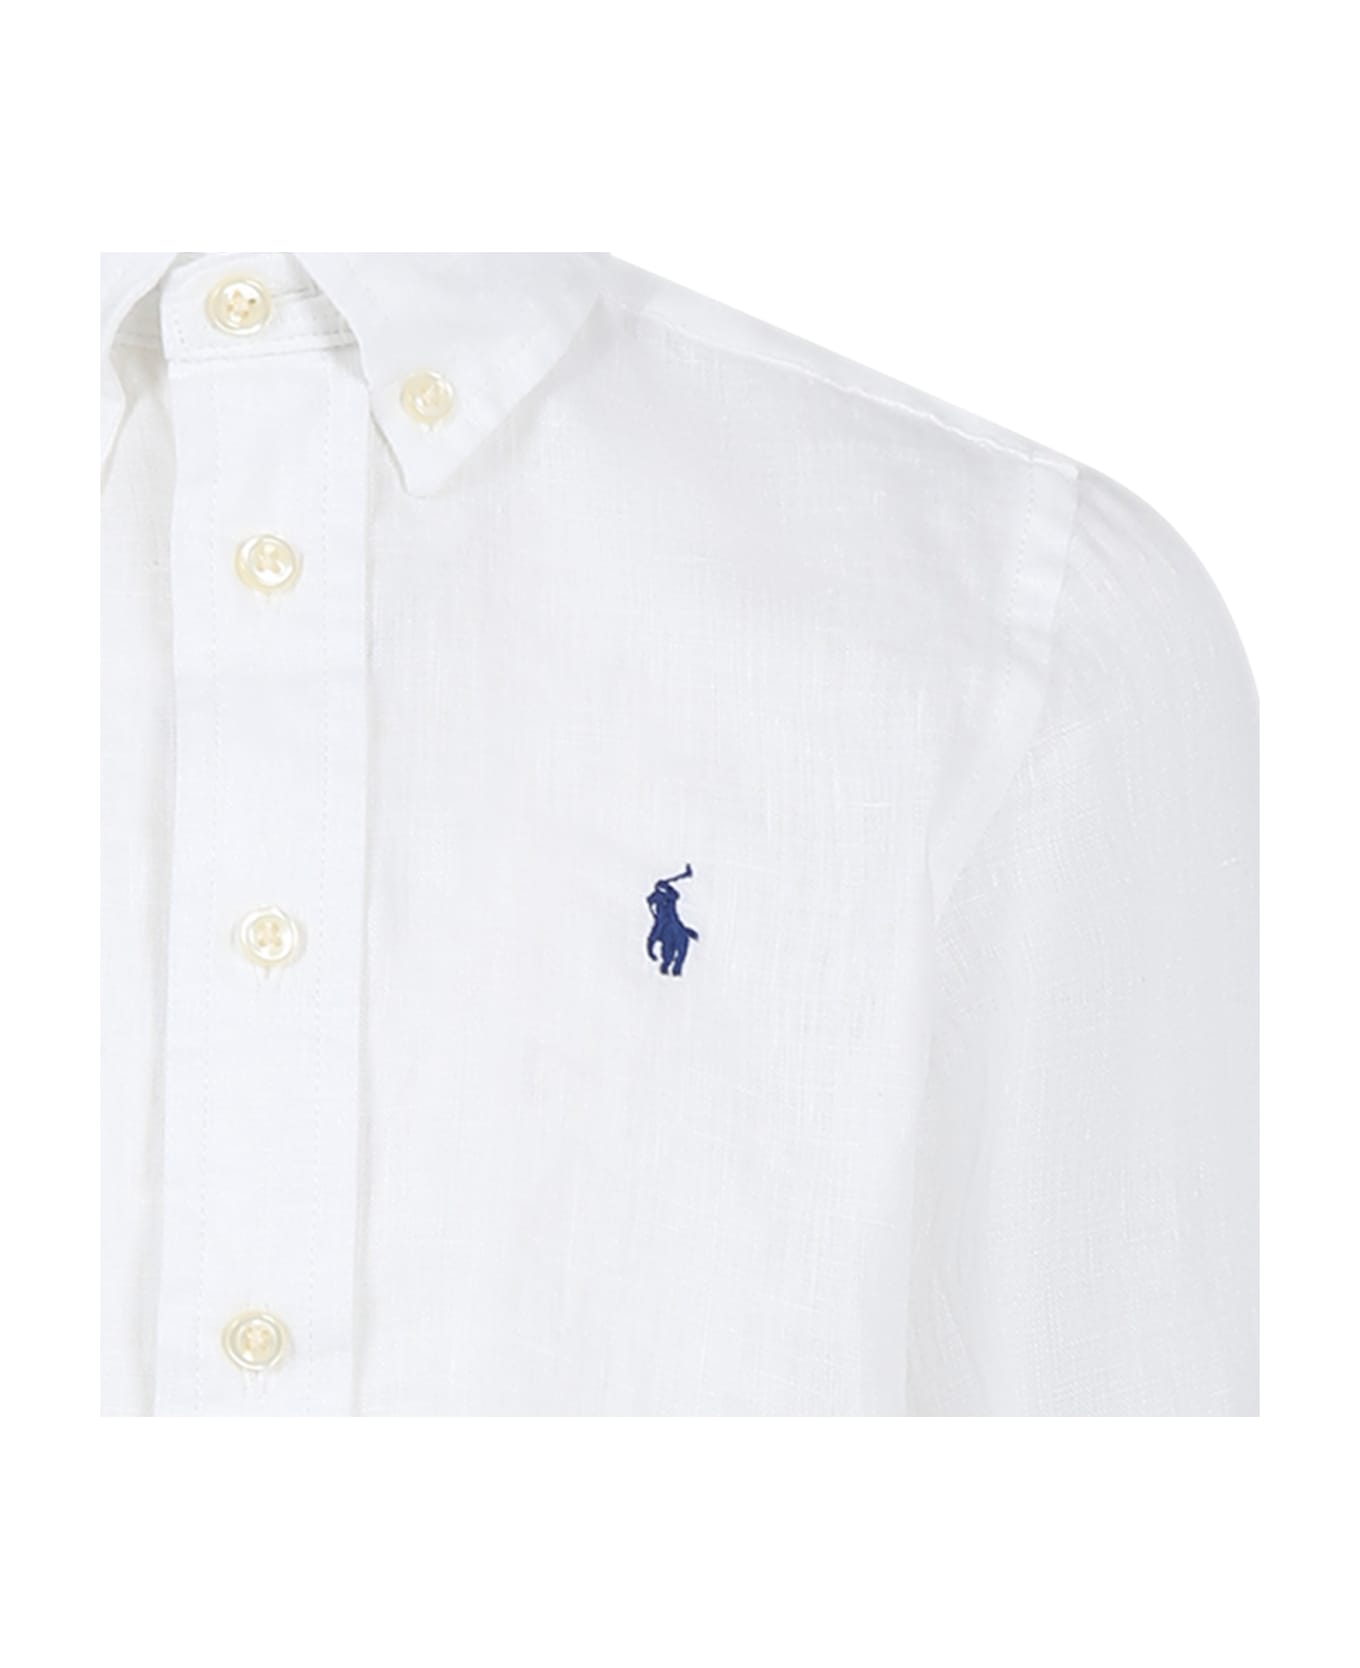 Ralph Lauren White Shirt For Boy With Pony - White